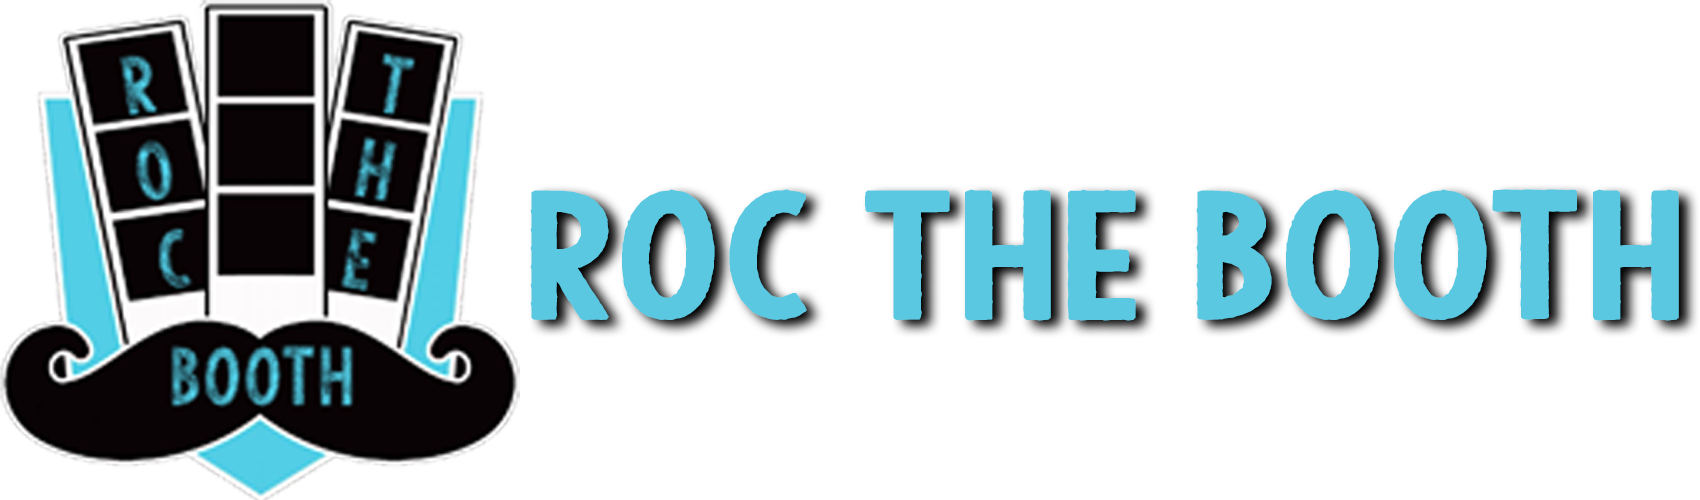 Roc The Booth Logo PNG